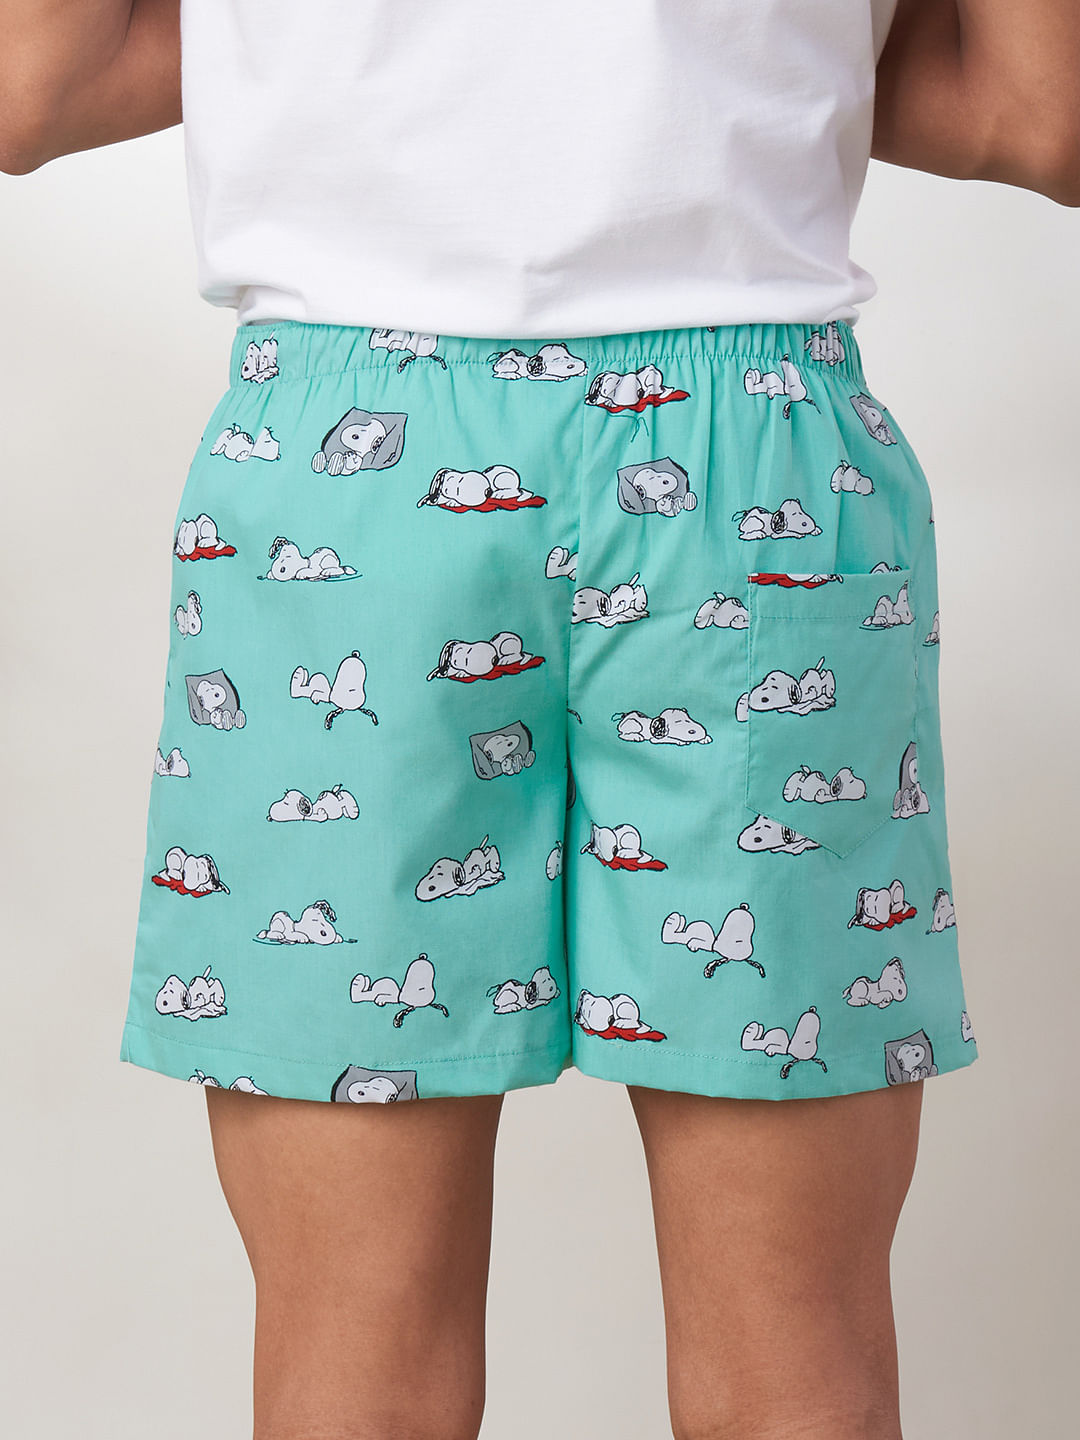 Buy Peanuts Snoopy Boxer Shorts at The Souled Store.